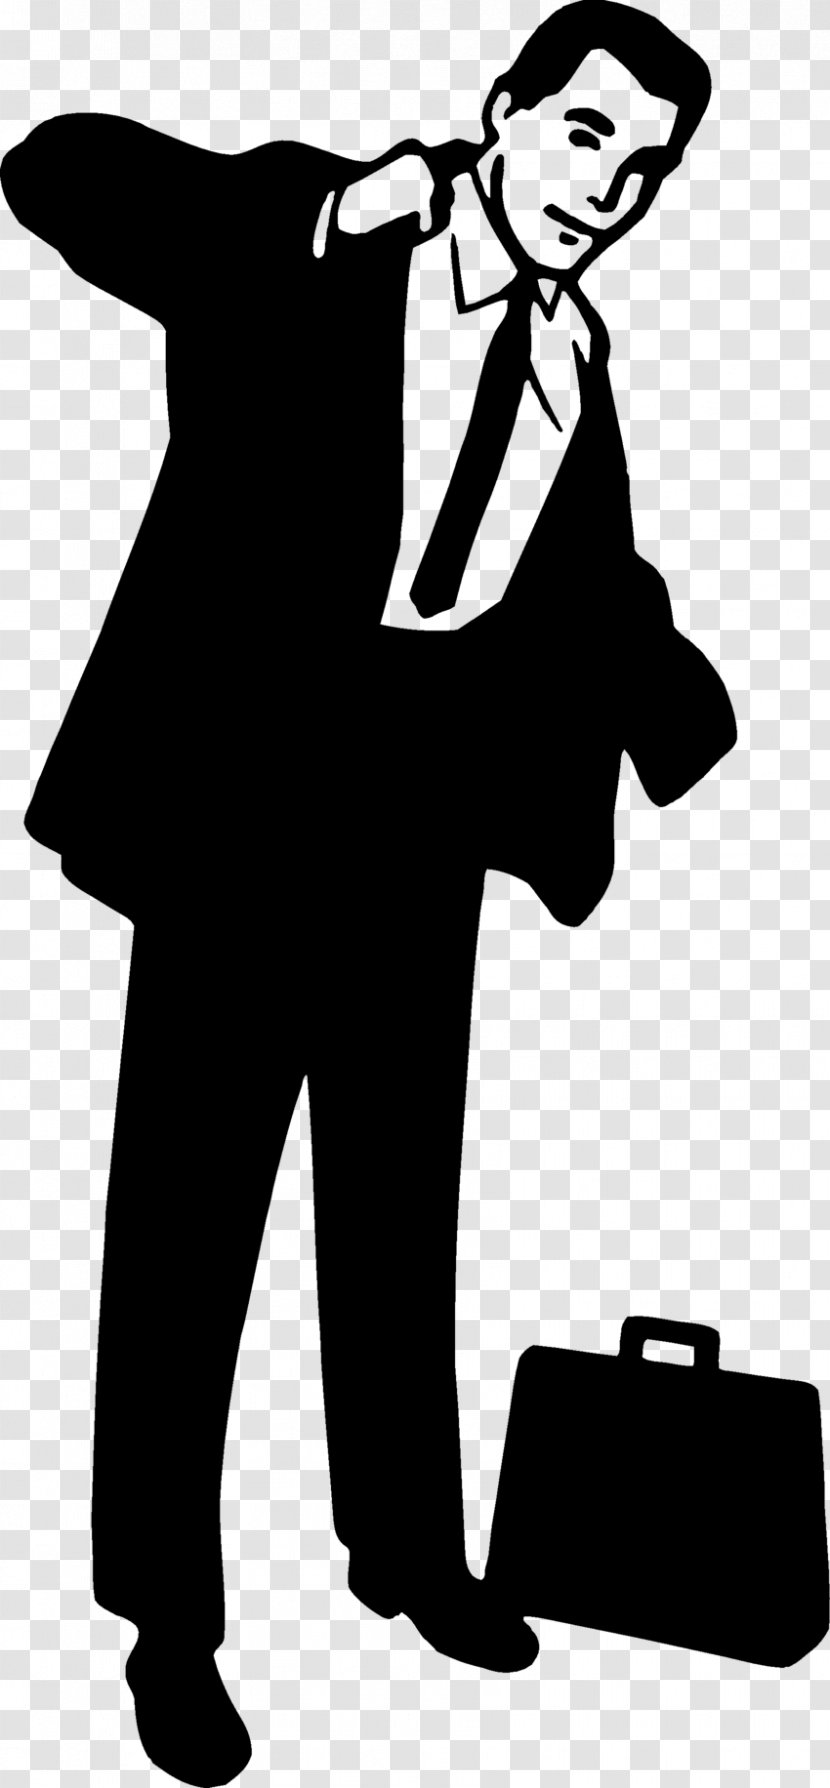 Businessperson Photography - Black And White - Silhouette Transparent PNG